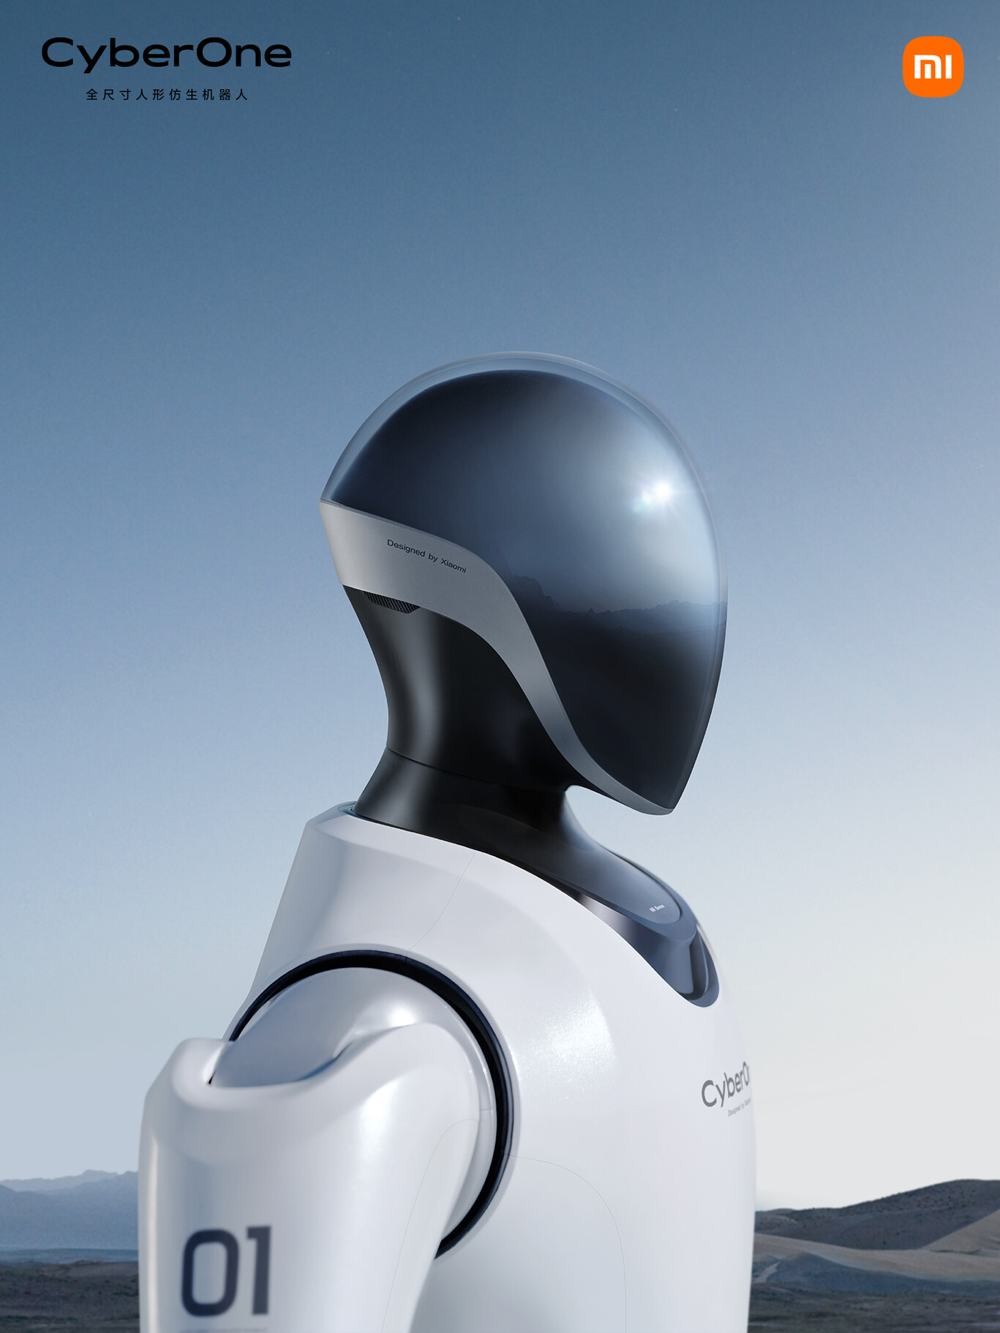 CyberOne is the first humanoid robot by Xiaomi